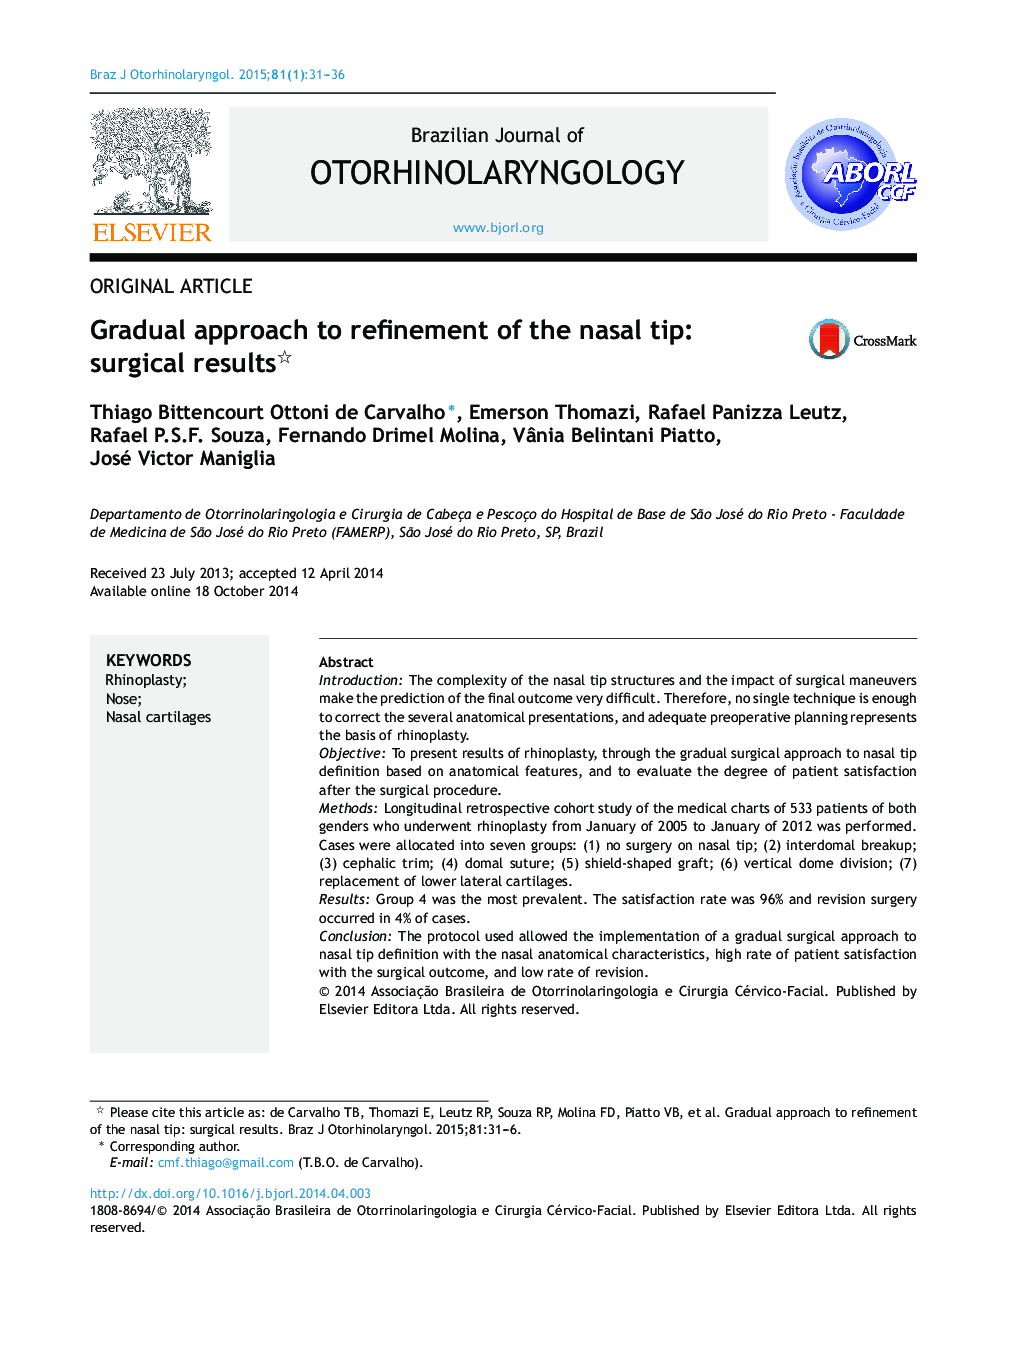 Gradual approach to refinement of the nasal tip: surgical results 